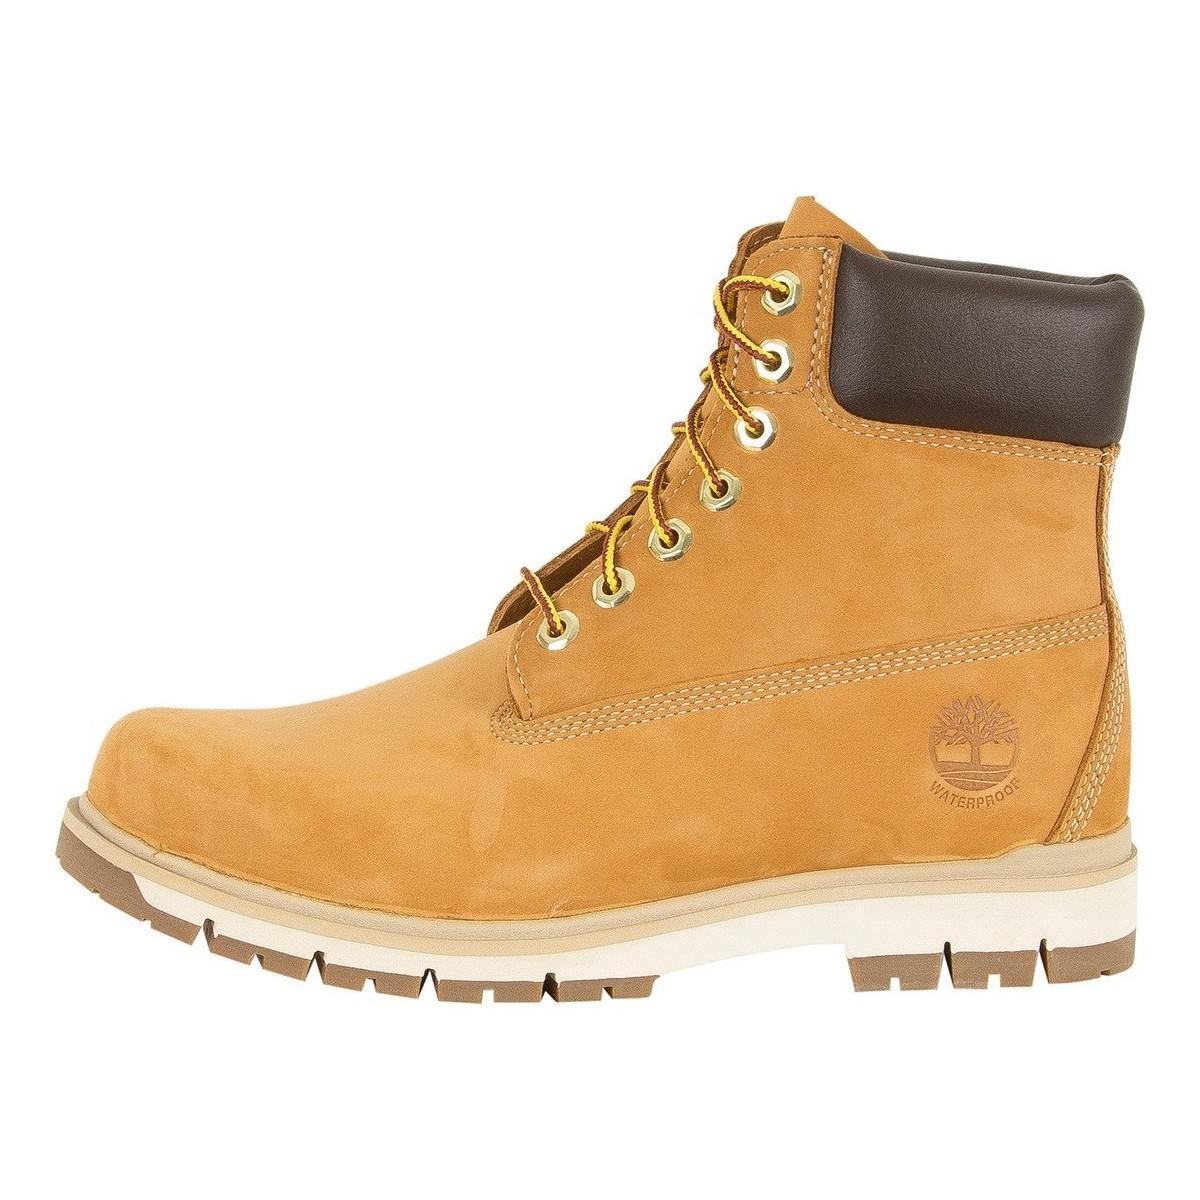 Timberland Leather 6 In Premium Boot in Beige (Natural) for Men - Lyst